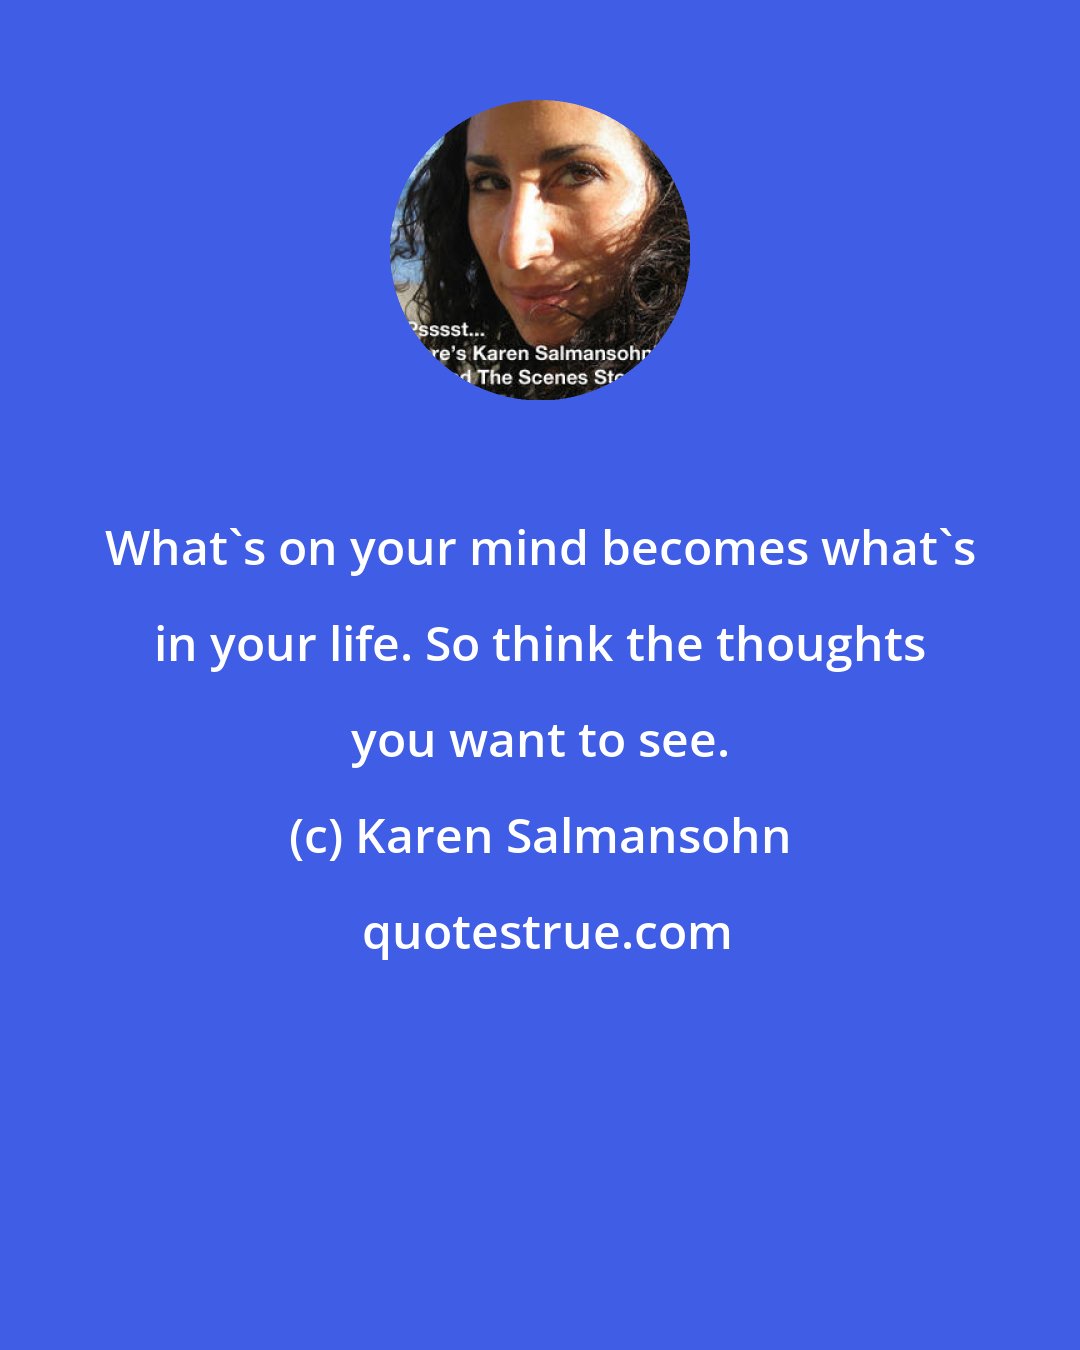 Karen Salmansohn: What's on your mind becomes what's in your life. So think the thoughts you want to see.